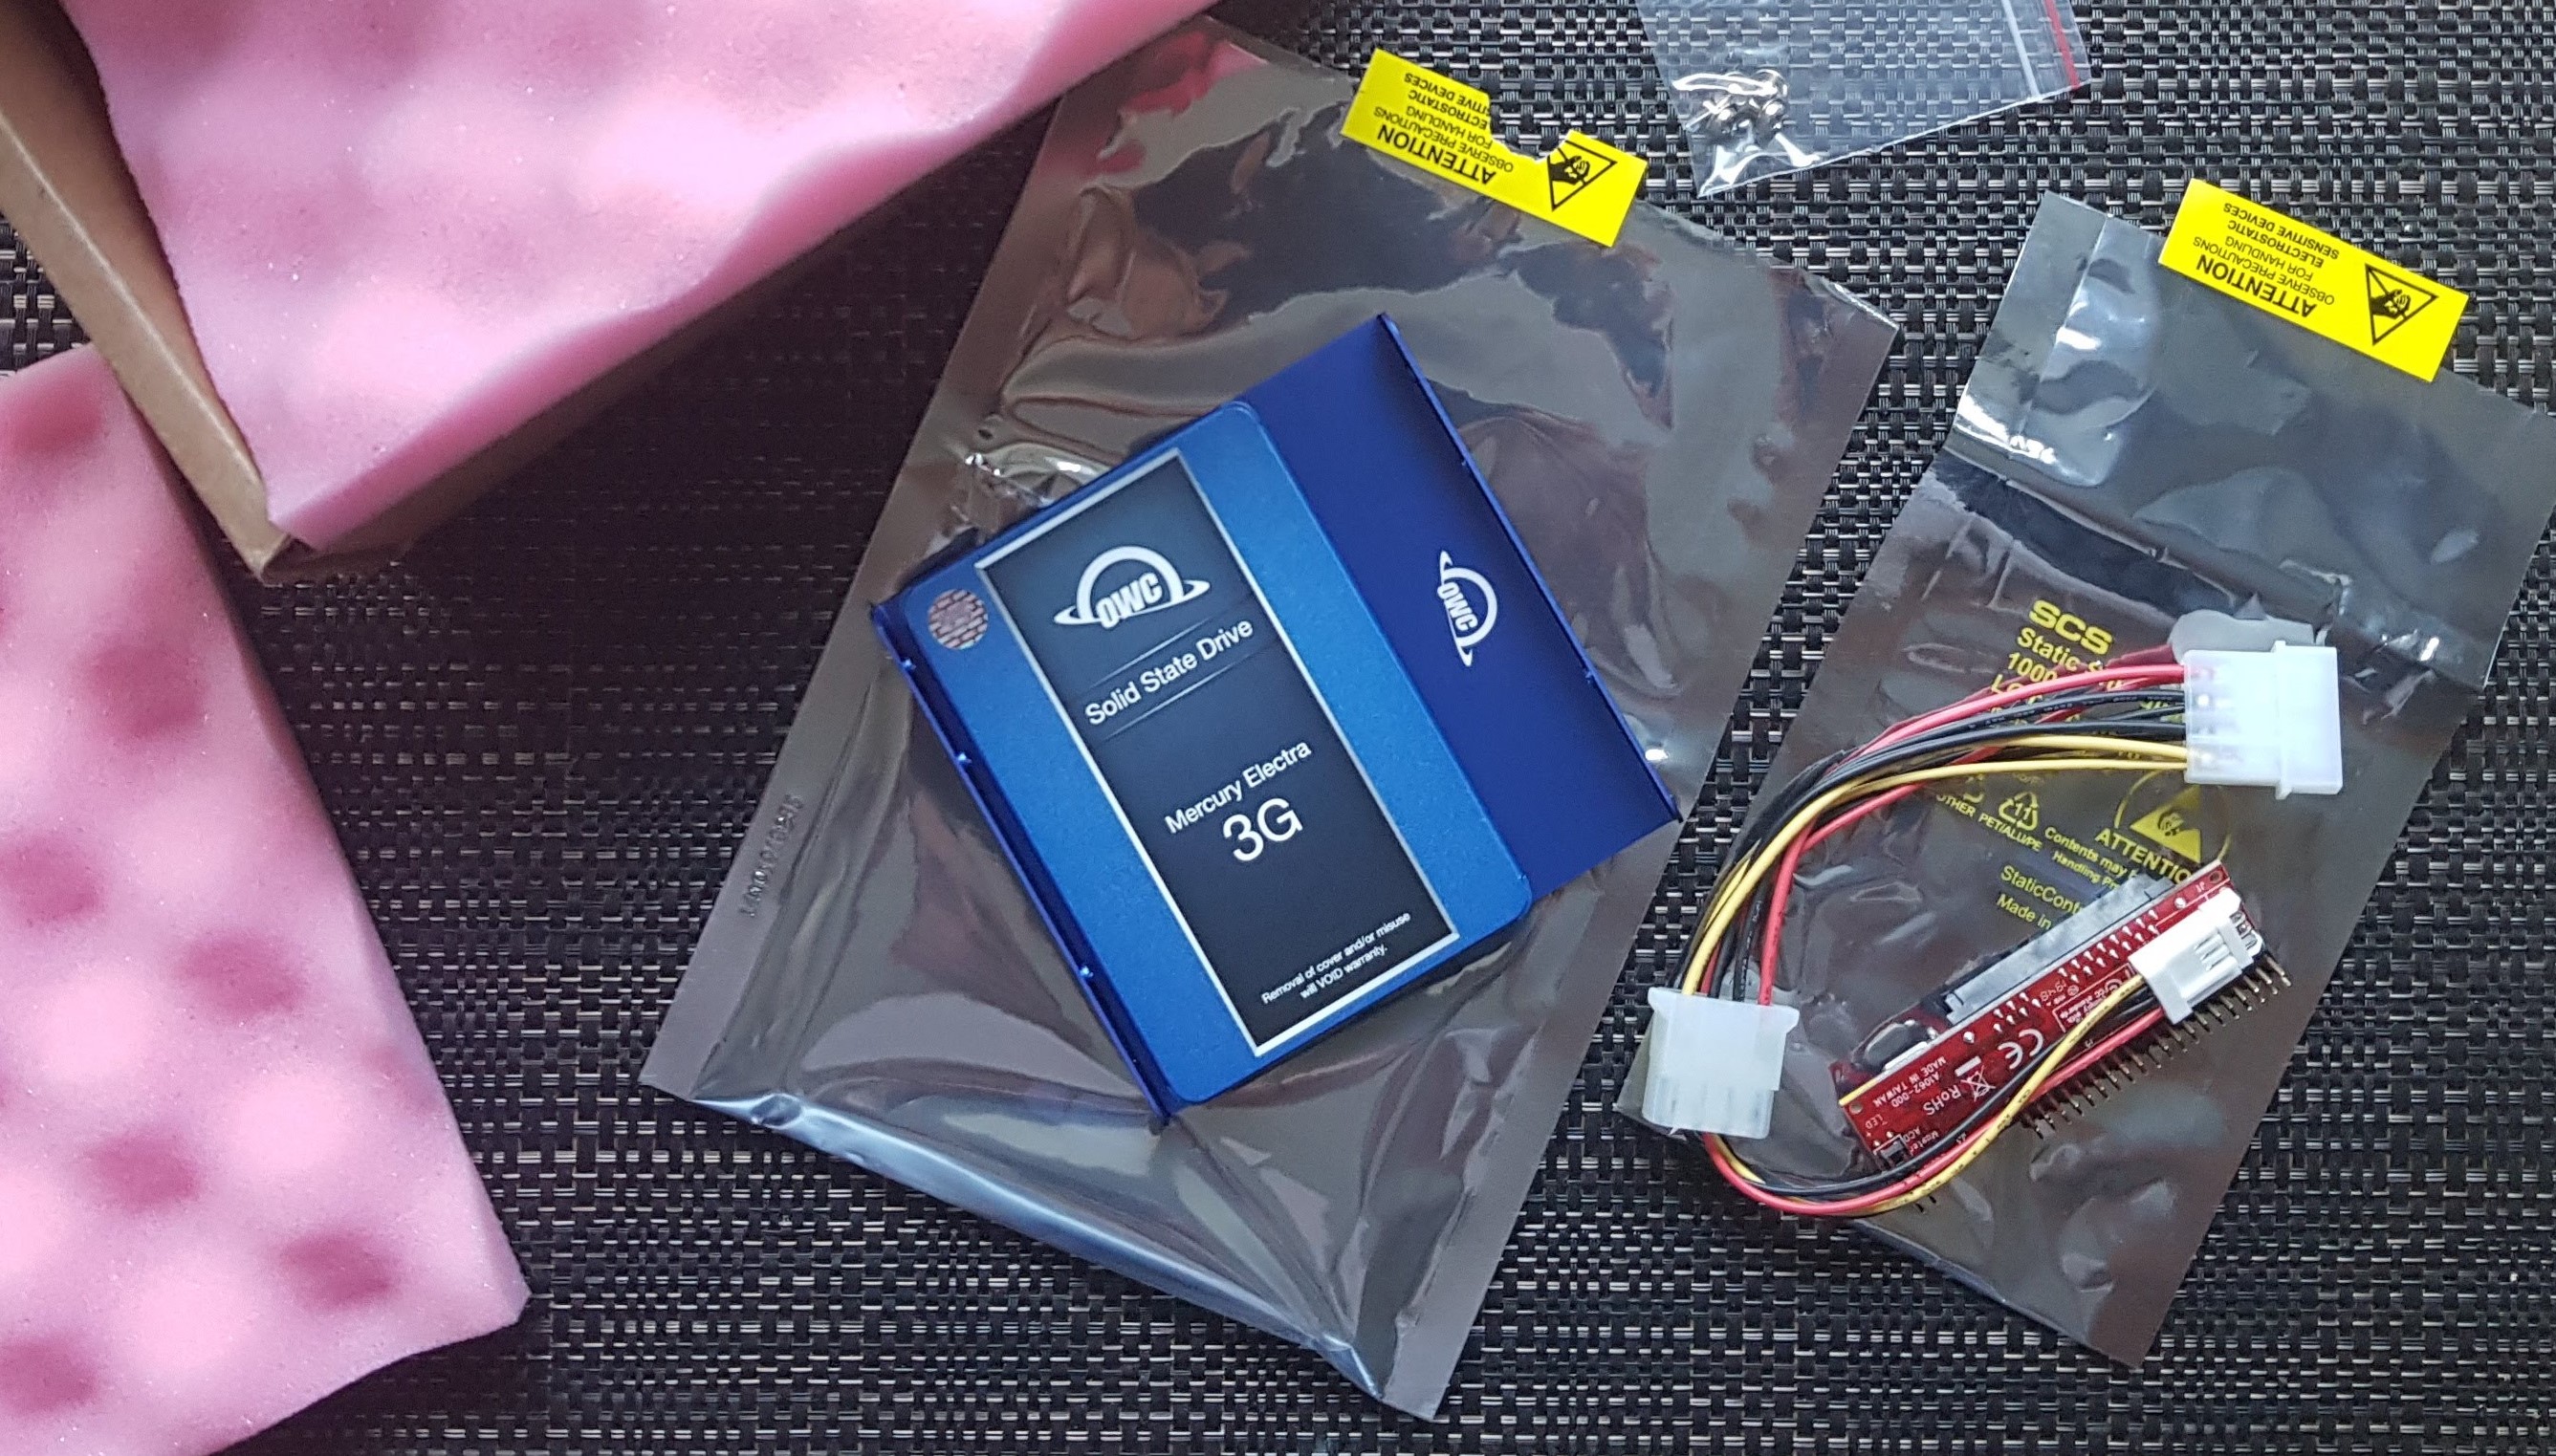 A solid-state hard drive, surrounded by a box, some static-shielding packaging, and a EIDE to SATA adapter